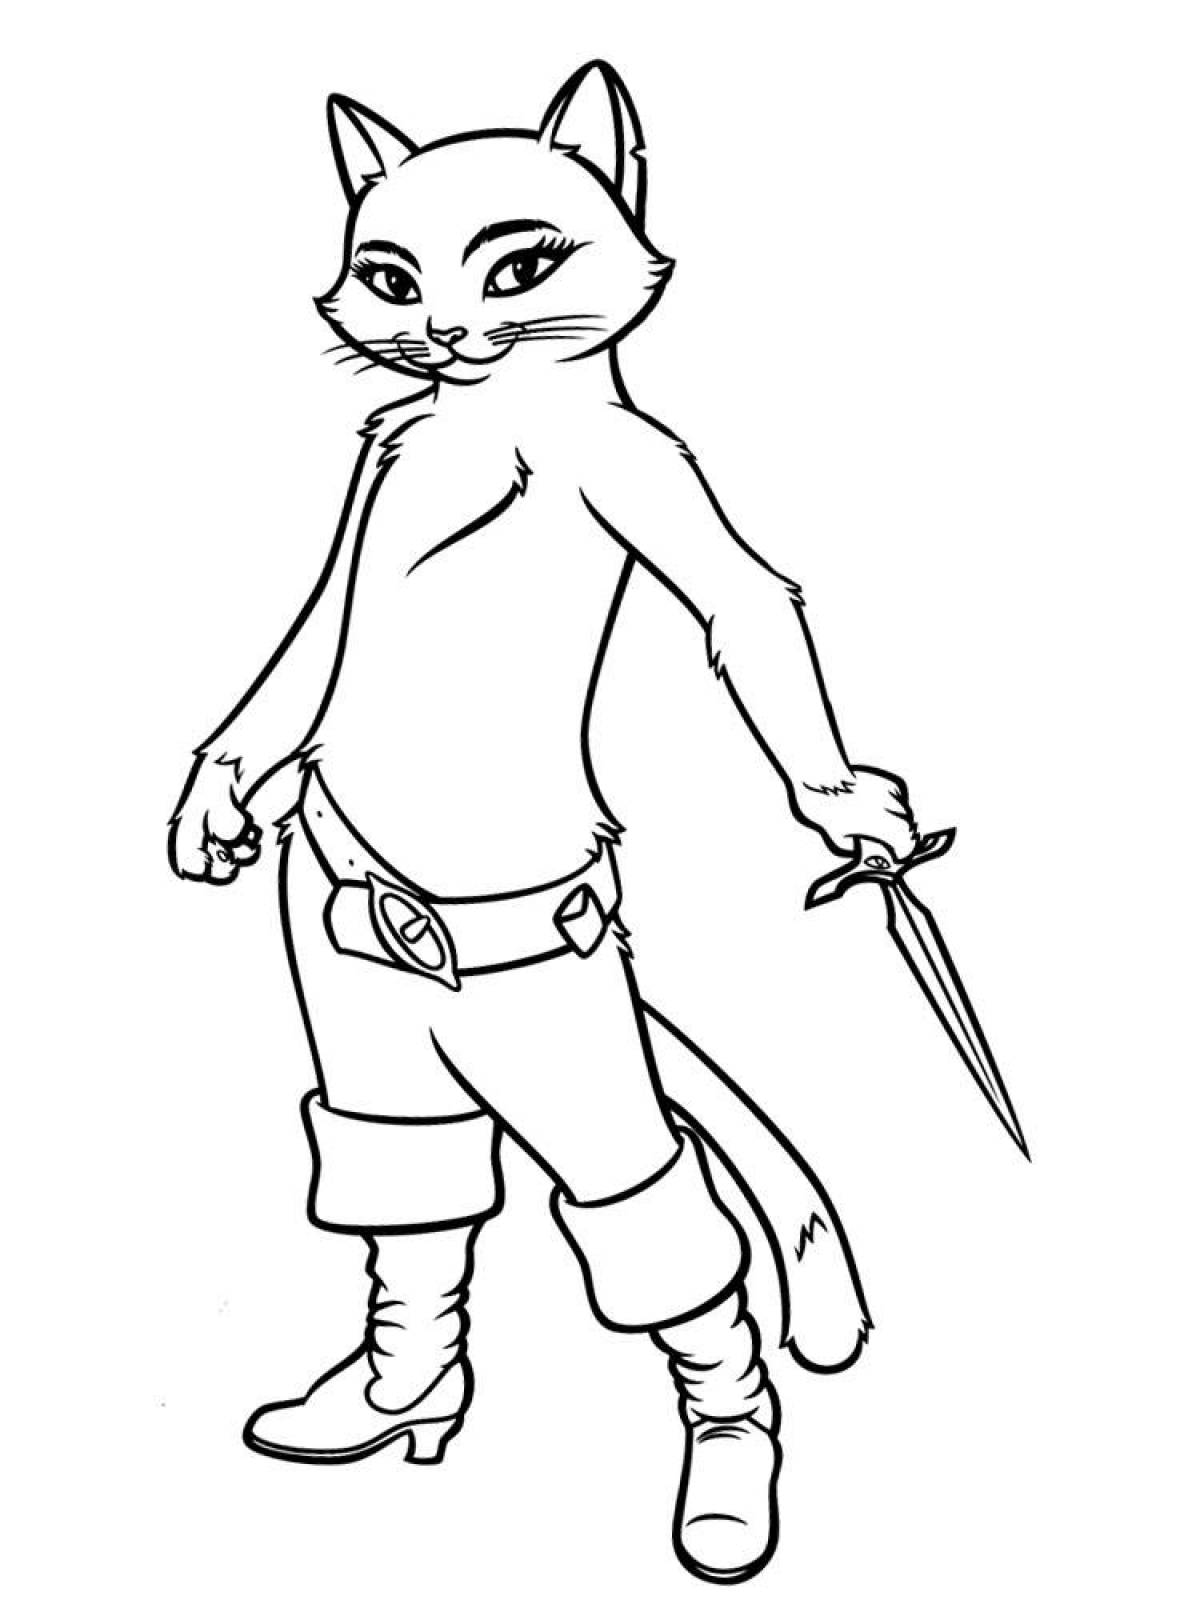 Courageous puss in boots coloring pages for kids